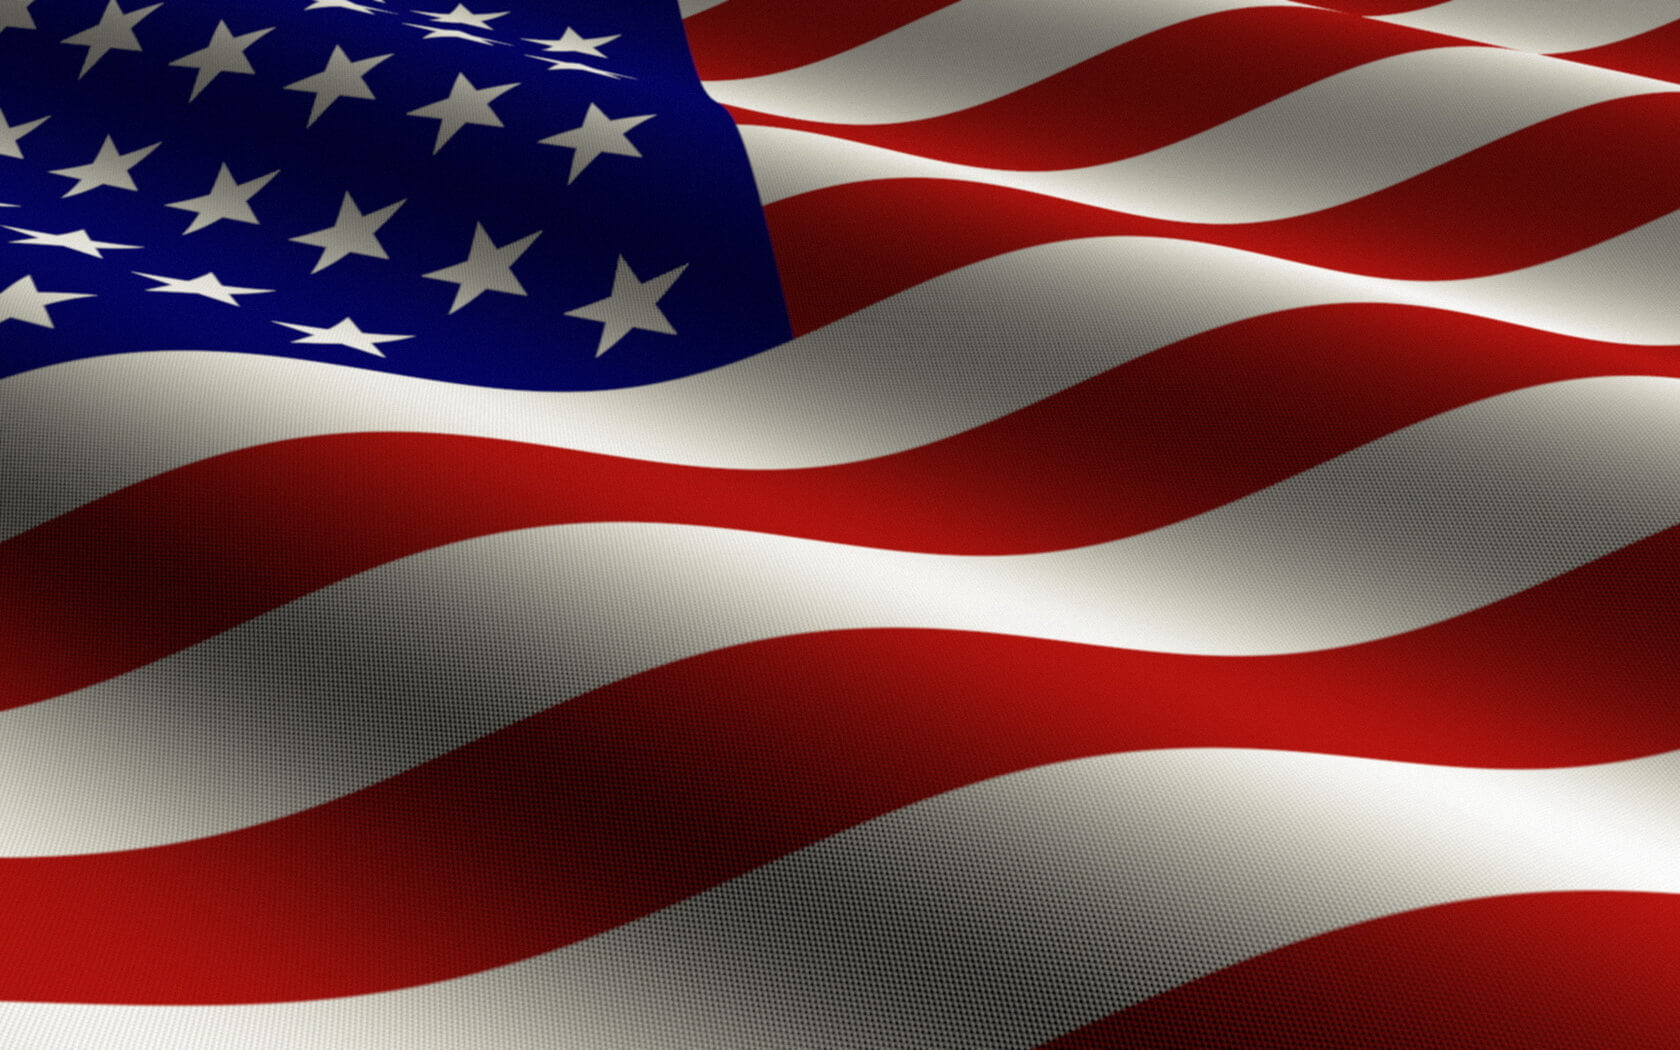 American Flag Backgrounds For Powerpoint Templates – Ppt Regarding American Flag Powerpoint Template